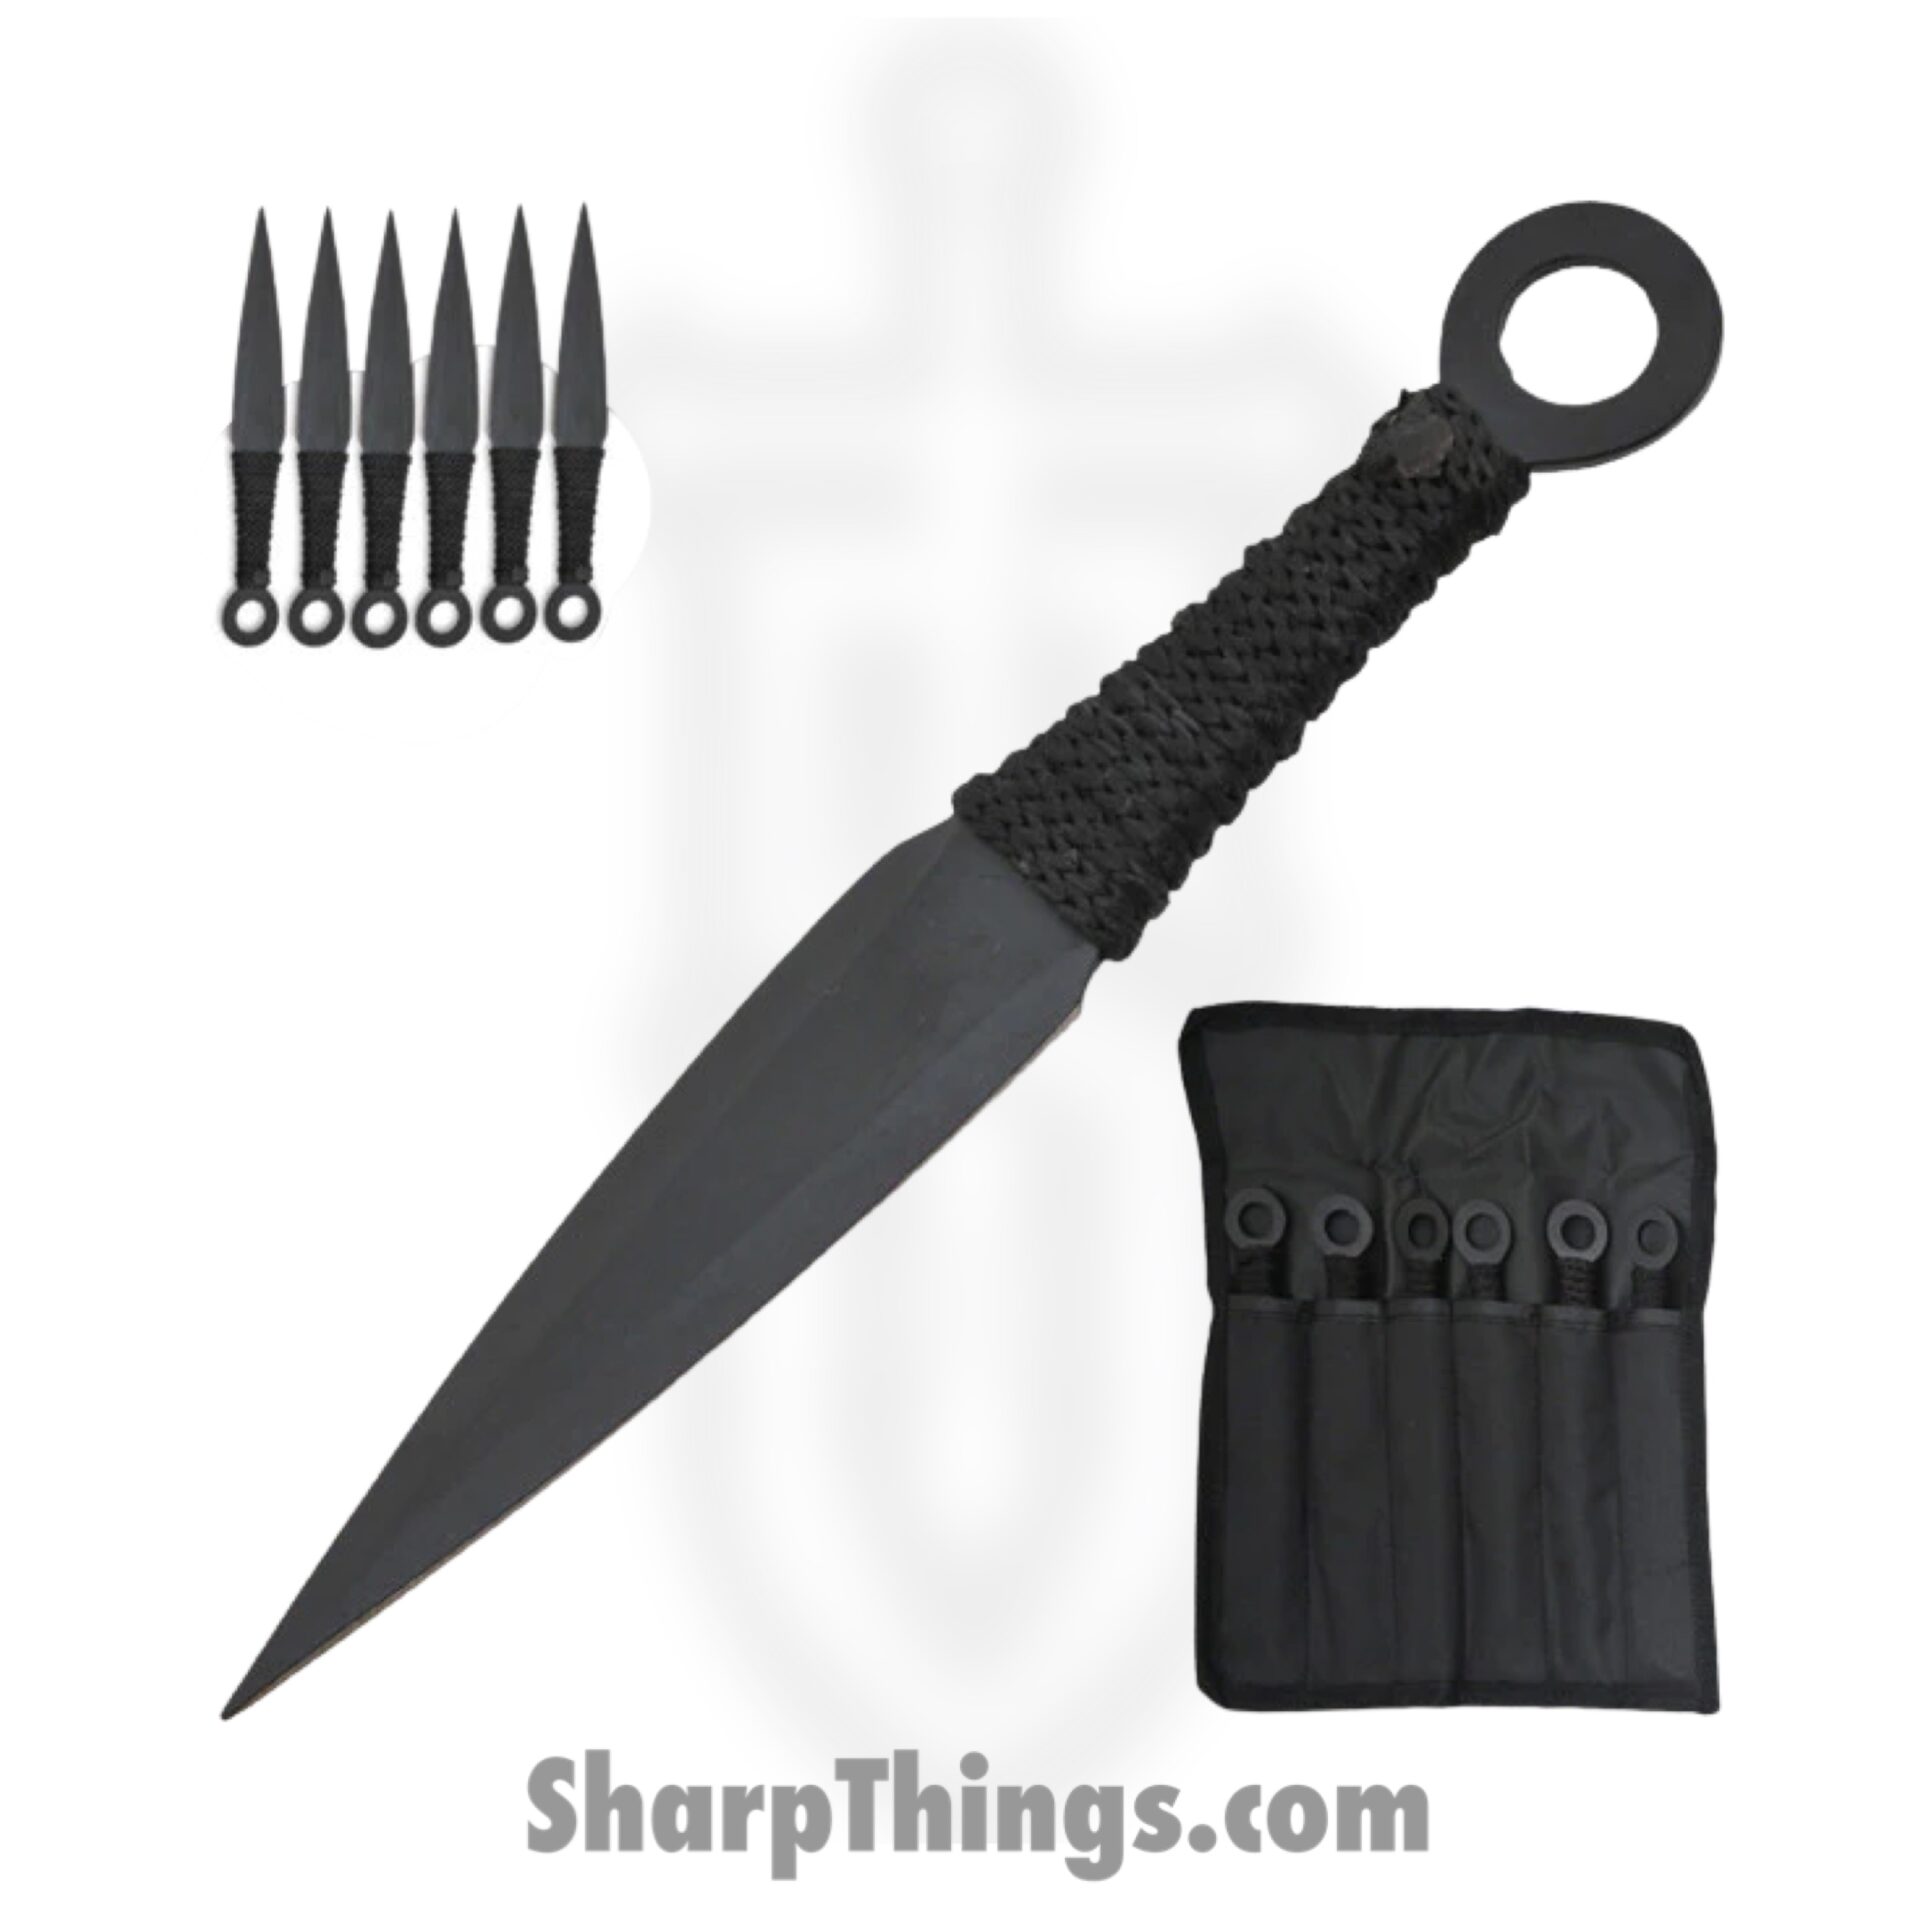 Black Dragon Throwing Knives - Dragon Throwing Knife Set - Clip Point Knife  Thrower Sets